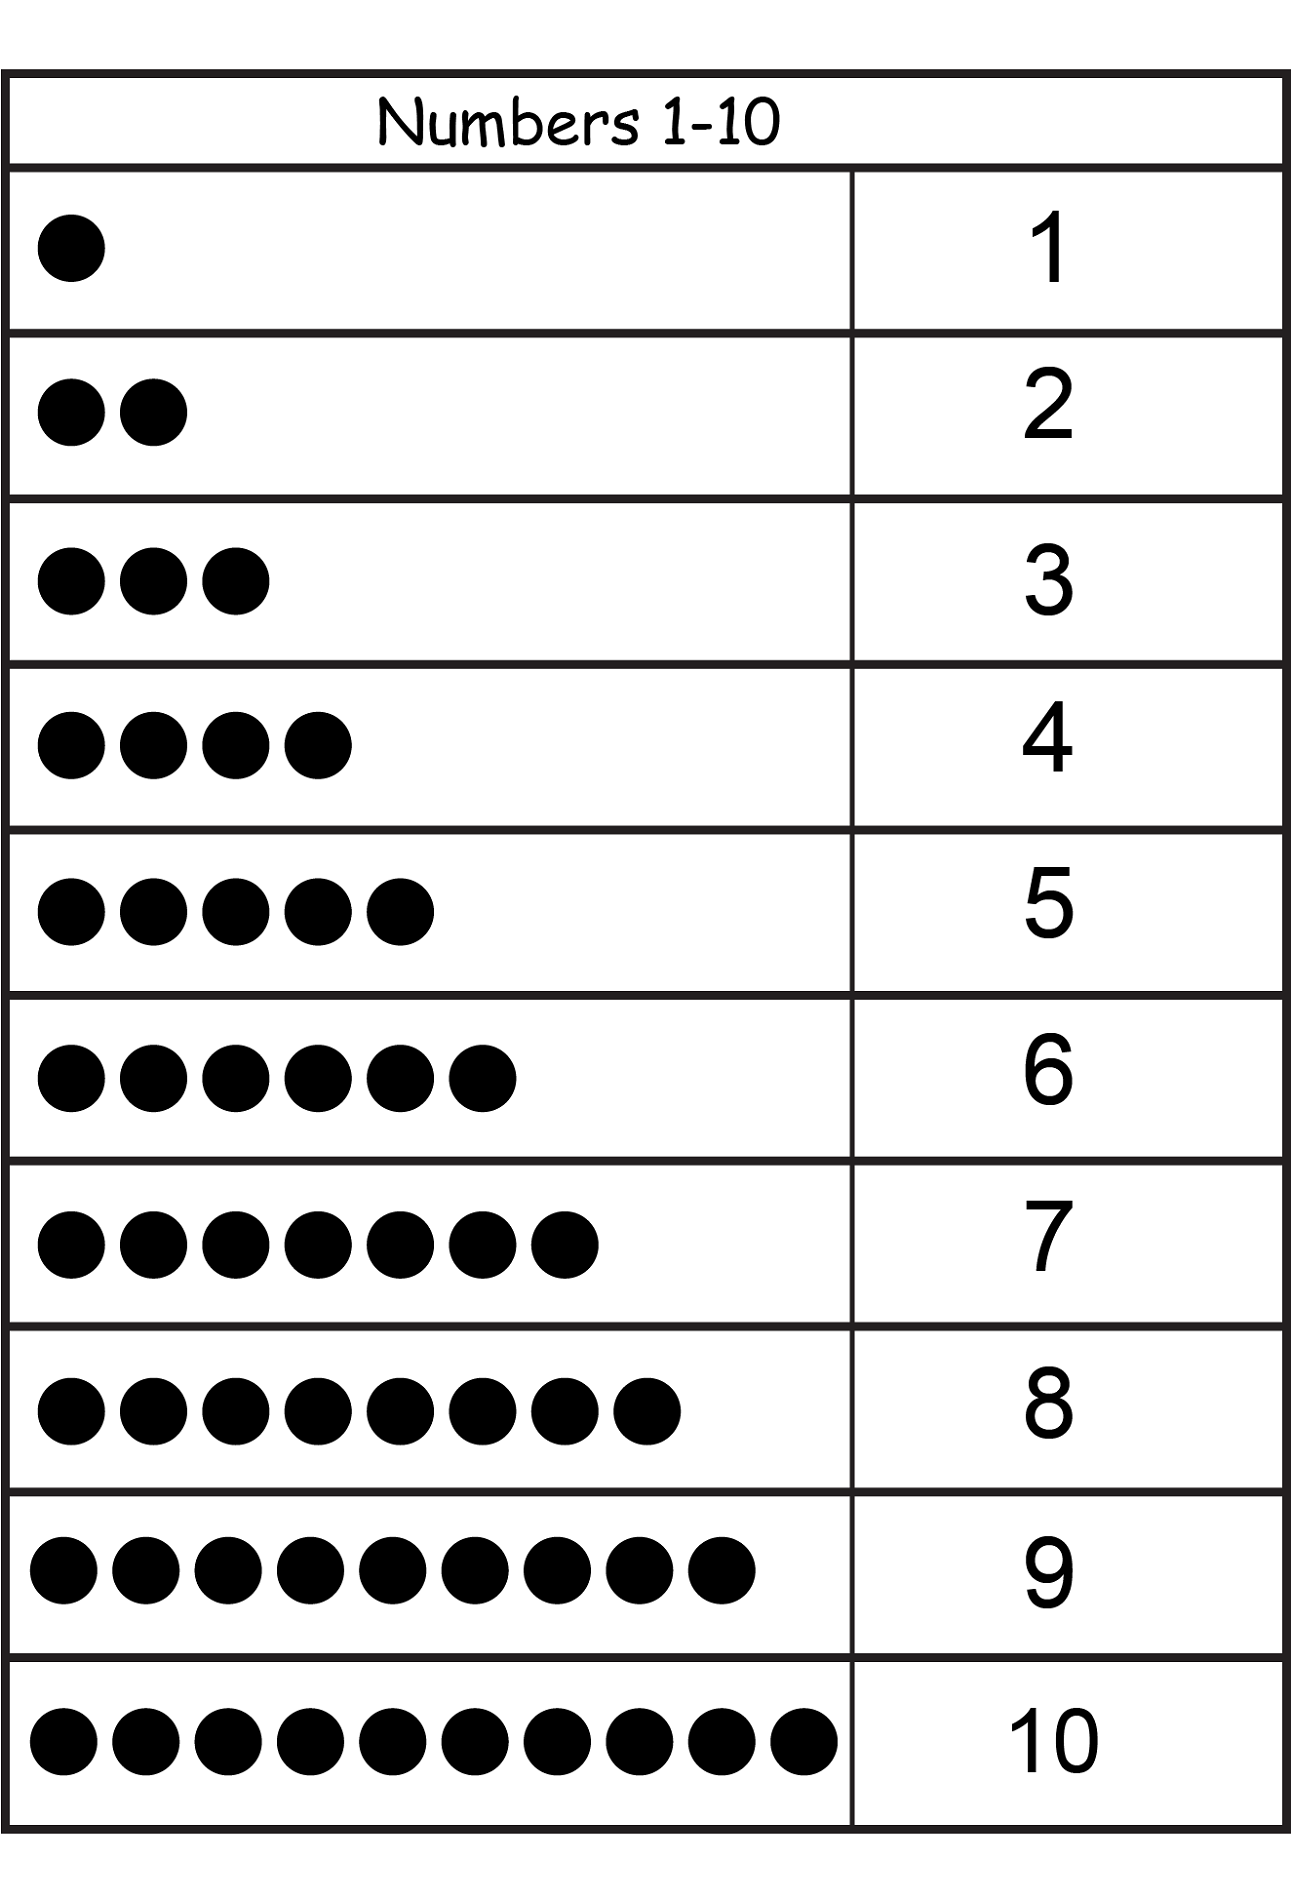 thousands-hundreds-tens-ones-place-value-worksheet-by-teach-simple